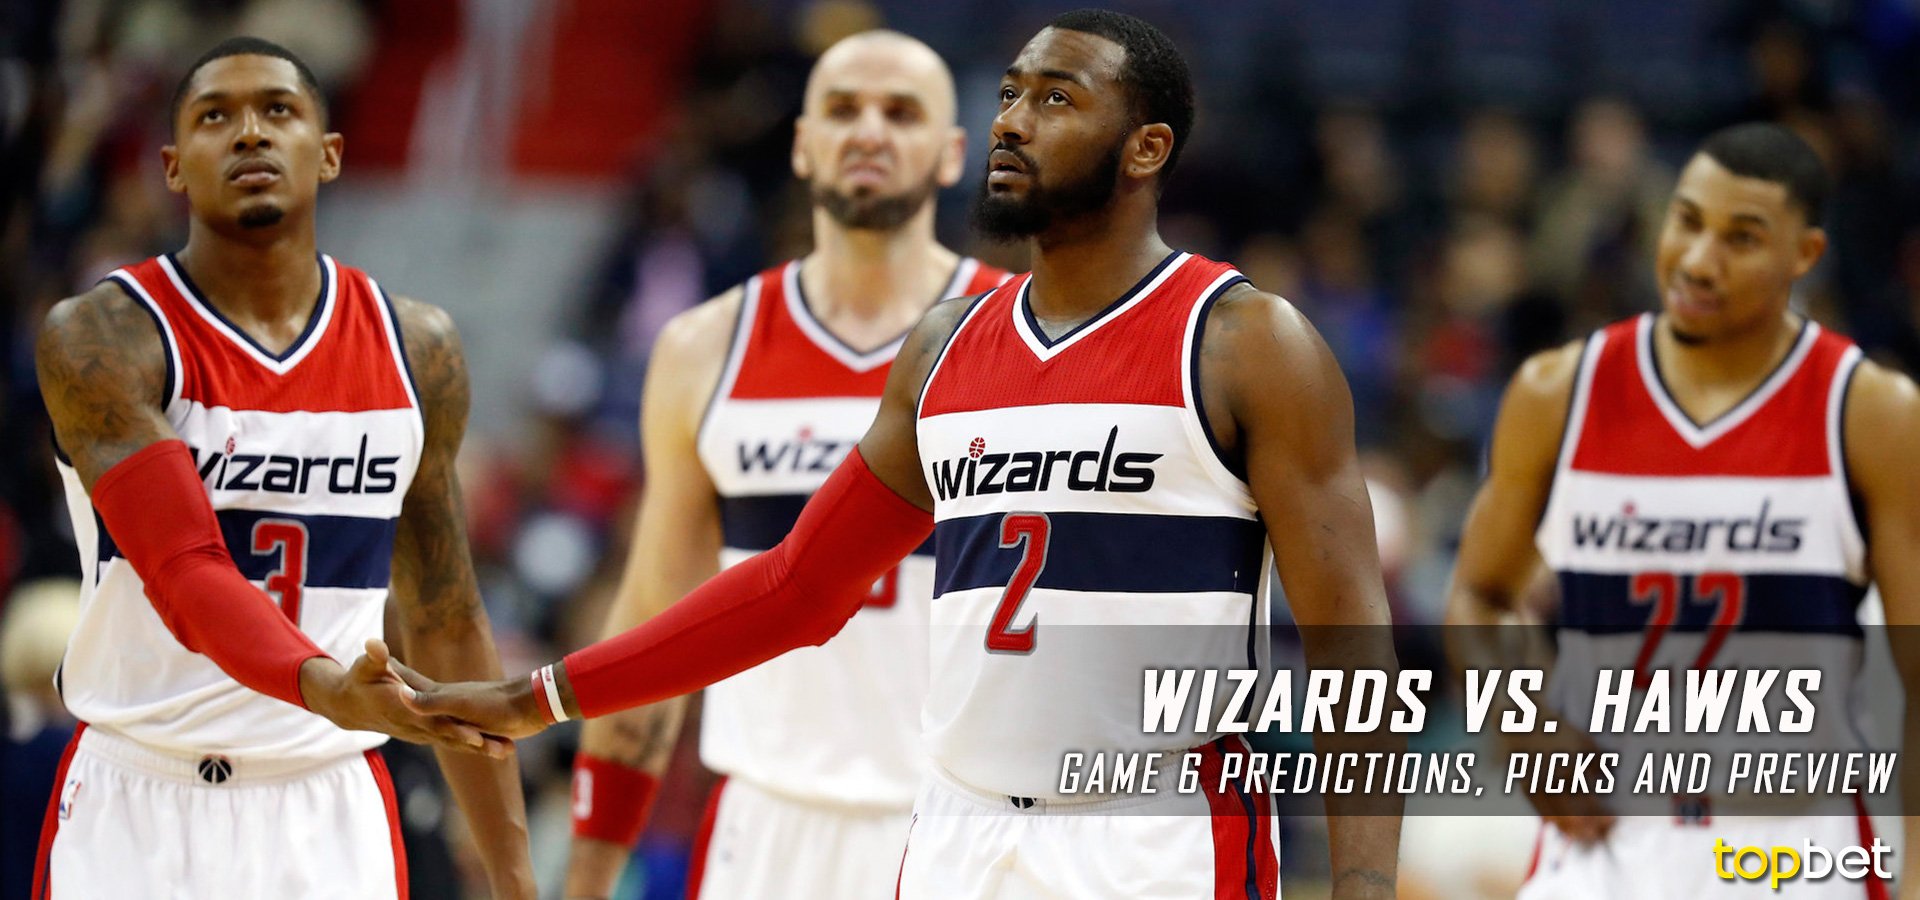 Wizards Vs Hawks Series Game 6 Predictions Picks And Preview